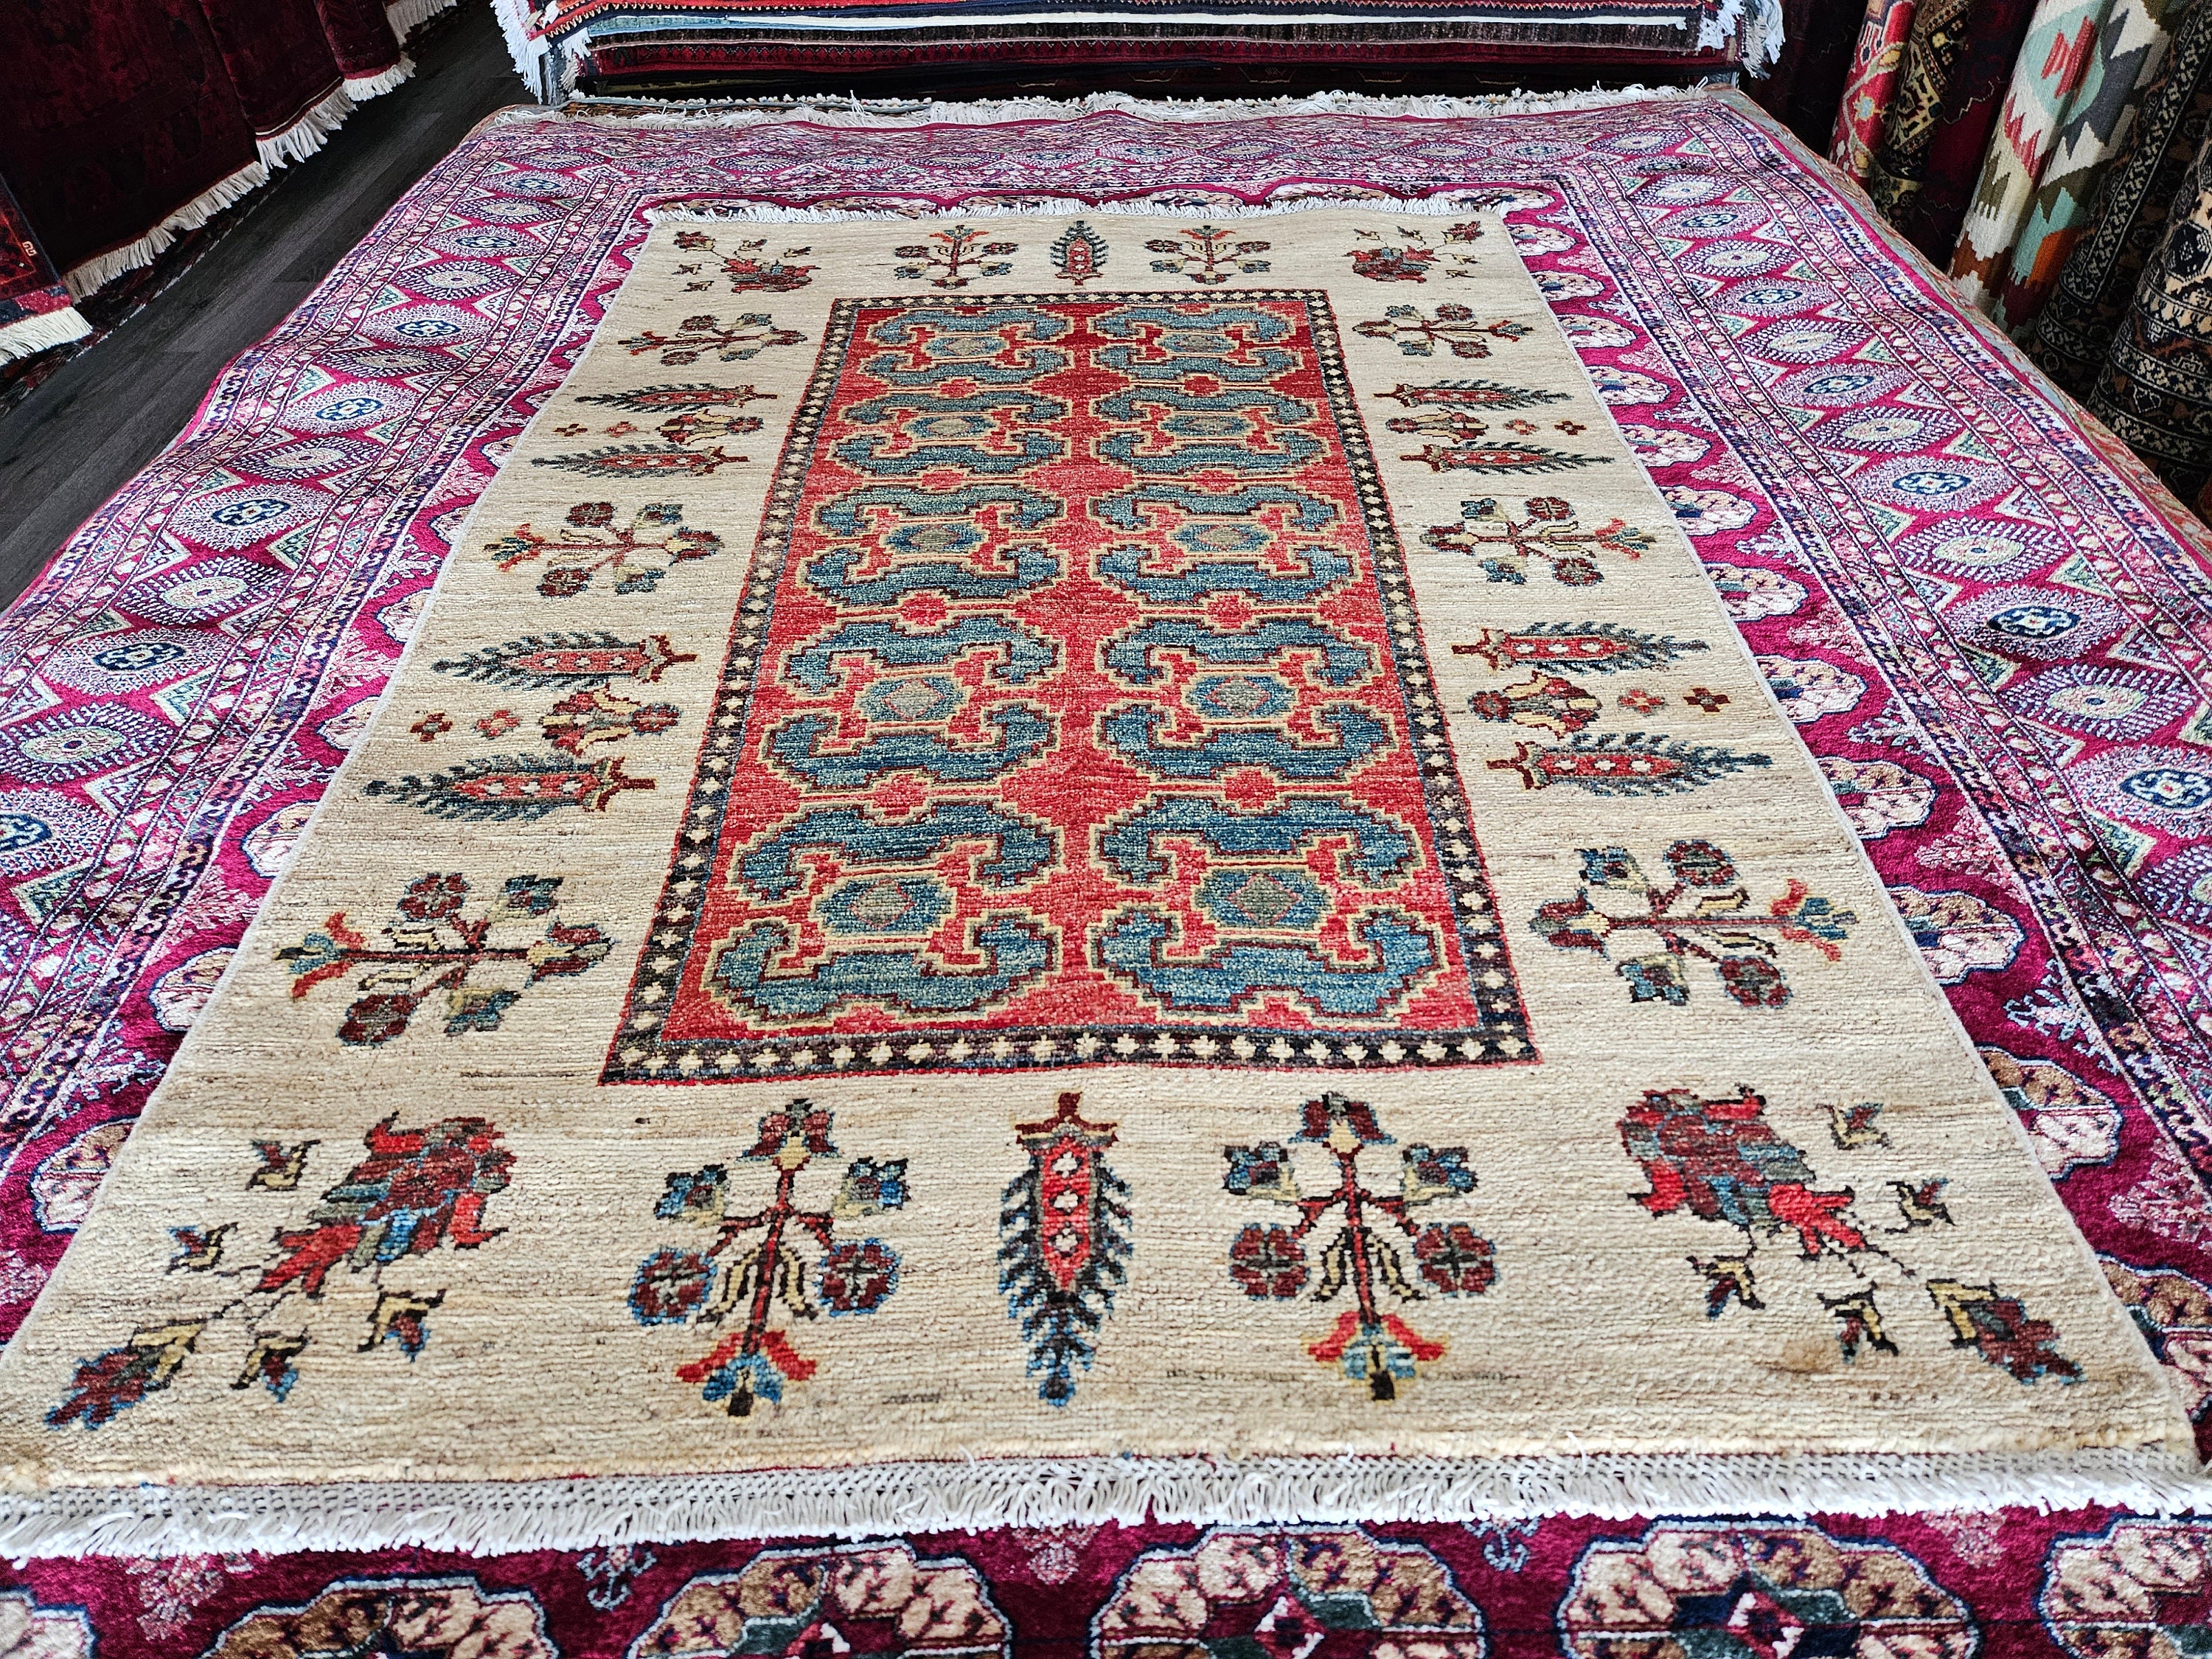 3x5 Authentic Afghan / Persian Rugs, Dusty Rose Carpet 